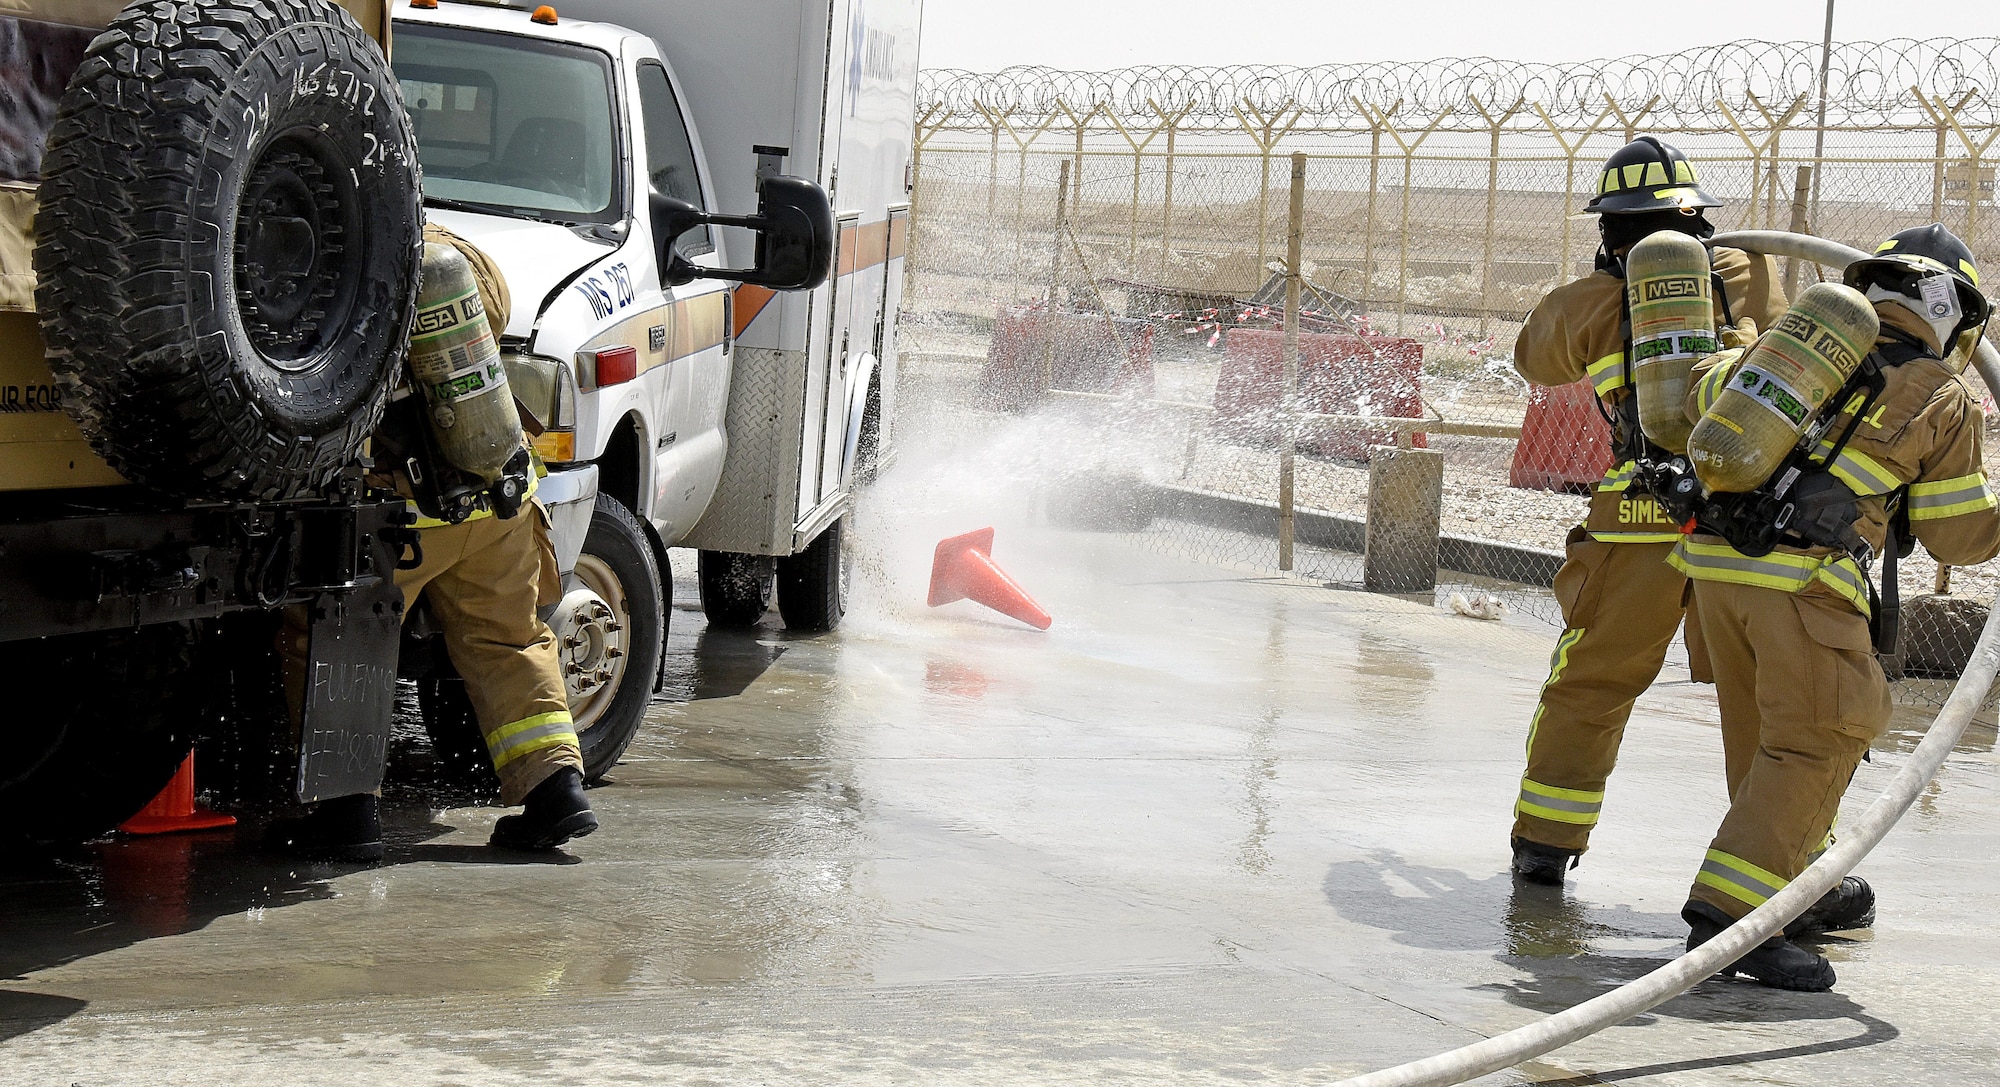 U.S. Air Force firefighters with the 379th Expeditionary Civil Engineer Squadron spray simulated points of fire during a Lifeflight medical trauma exercise at Al Udeid Air Base, Qatar, March 21, 2017. During the exercise, firefighters put out a simulated fire resulting from a mock vehicle accident. Scenarios like these are enacted to help first responders train and maintain their skillsets. (U.S. Air Force photo by Senior Airman Cynthia A. Innocenti)